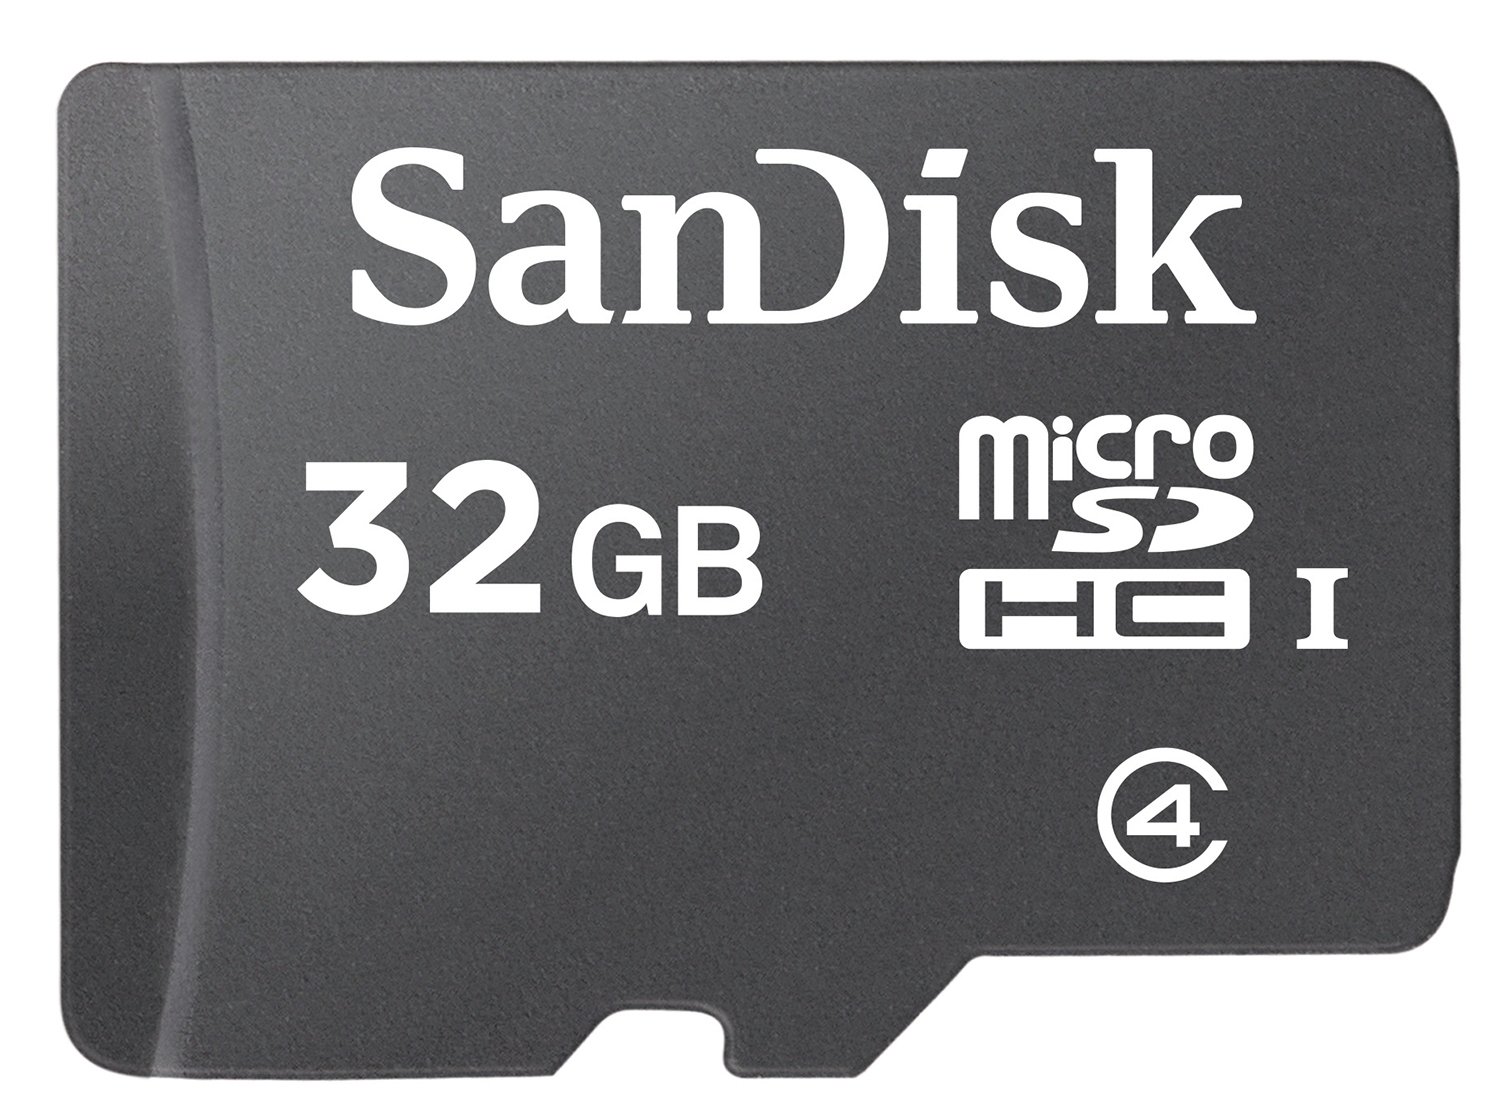 SanDisk Blue Micro SDHC Memory Card Review